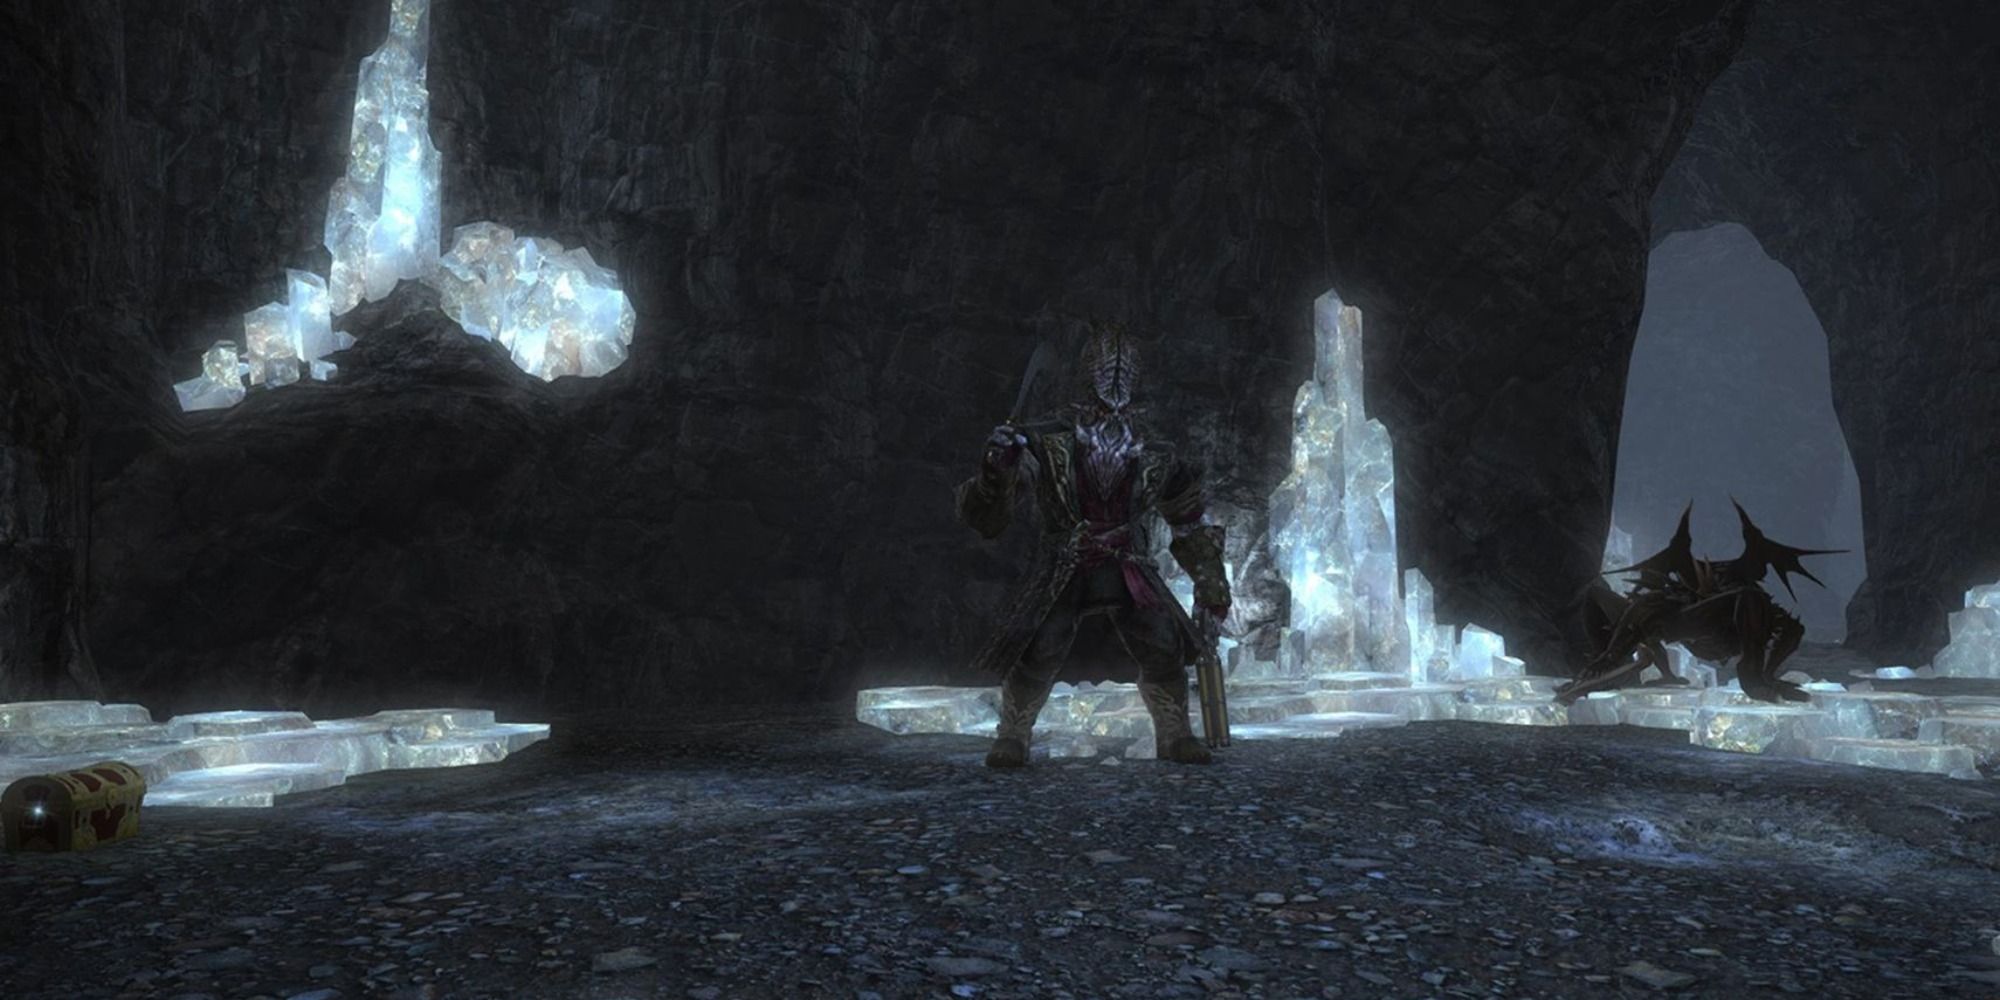 Palace of the Dead, Deep Dungeon in Final Fantasy 14